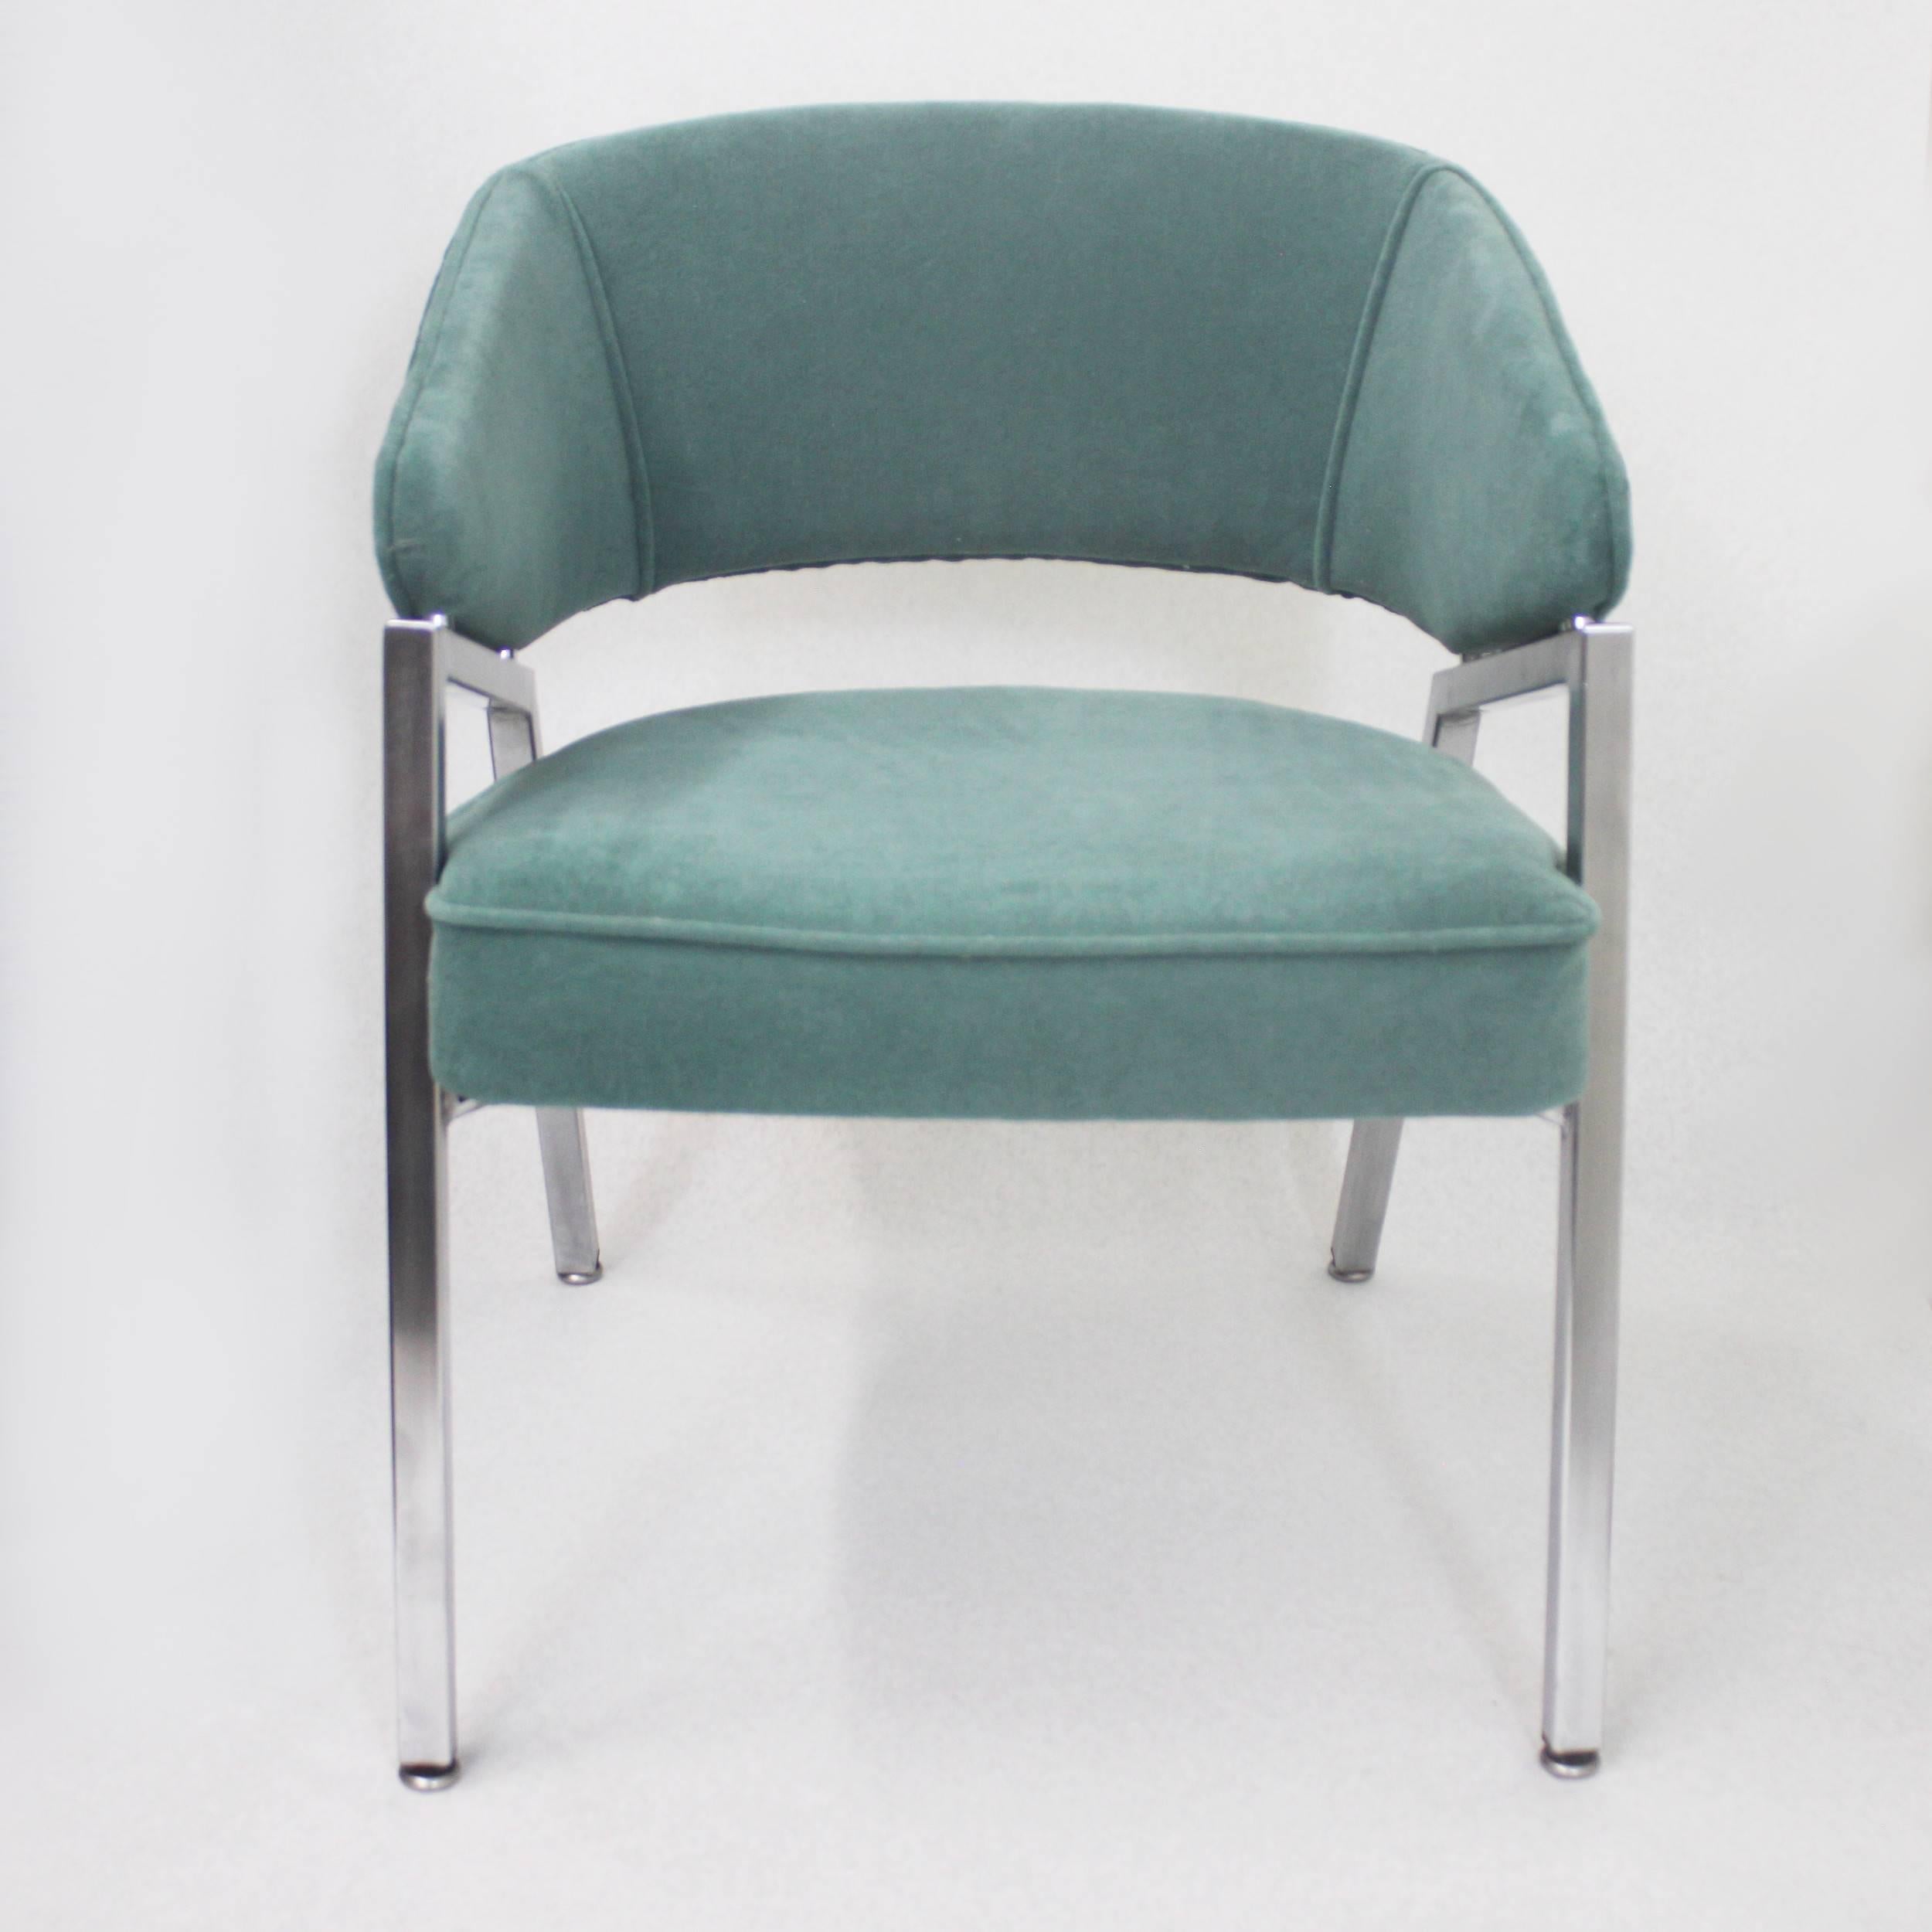 Rare Pair of 1970s Mid-Century Modern Teal Green and Chrome Side Armchairs 3